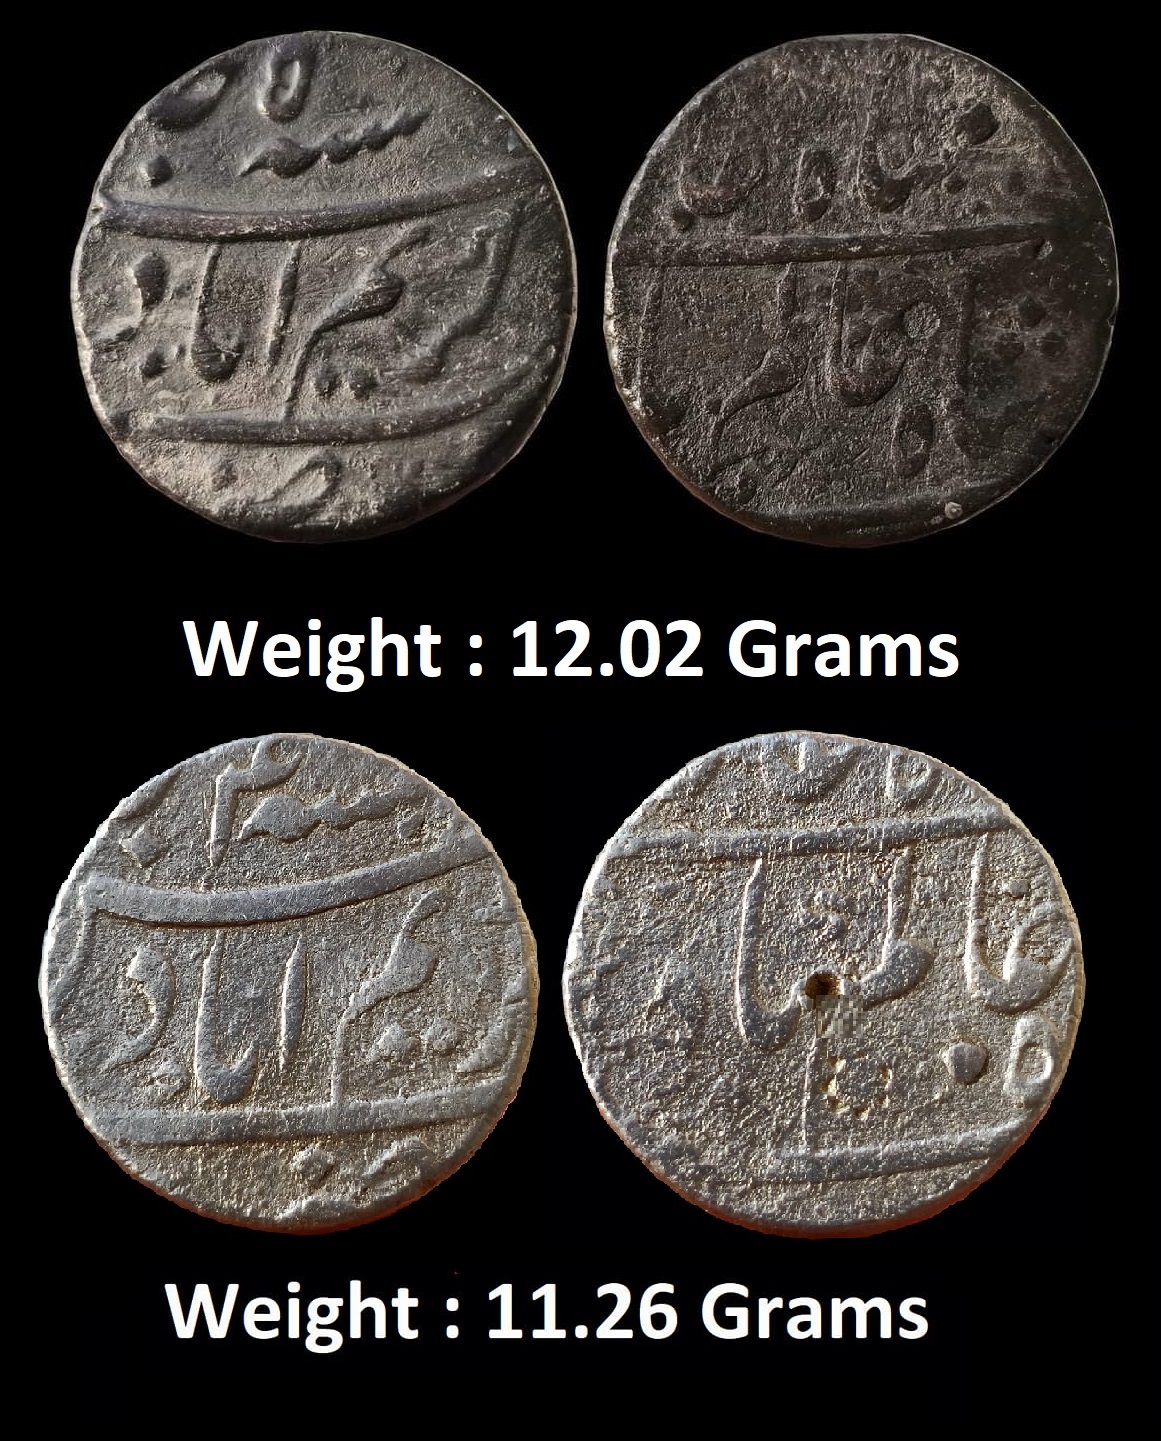 Set of 2 coins : 
Mughal : Shah Alam Bahadur (1707-1712 AD), Mint : Karimabad ( Full mint ) ; RY 5, similar to KM 347.11, Heavy Weight Specimen 
Weight : 12.02 Grams 
Very fine, Rare 
Mughal ; Shah Alam Bahadur ; Silver Rupee
Mint : Karimabad ( FULL MINT ) ; RY 4
Standard Weight Specimen 
Weight : 11.26 Grams